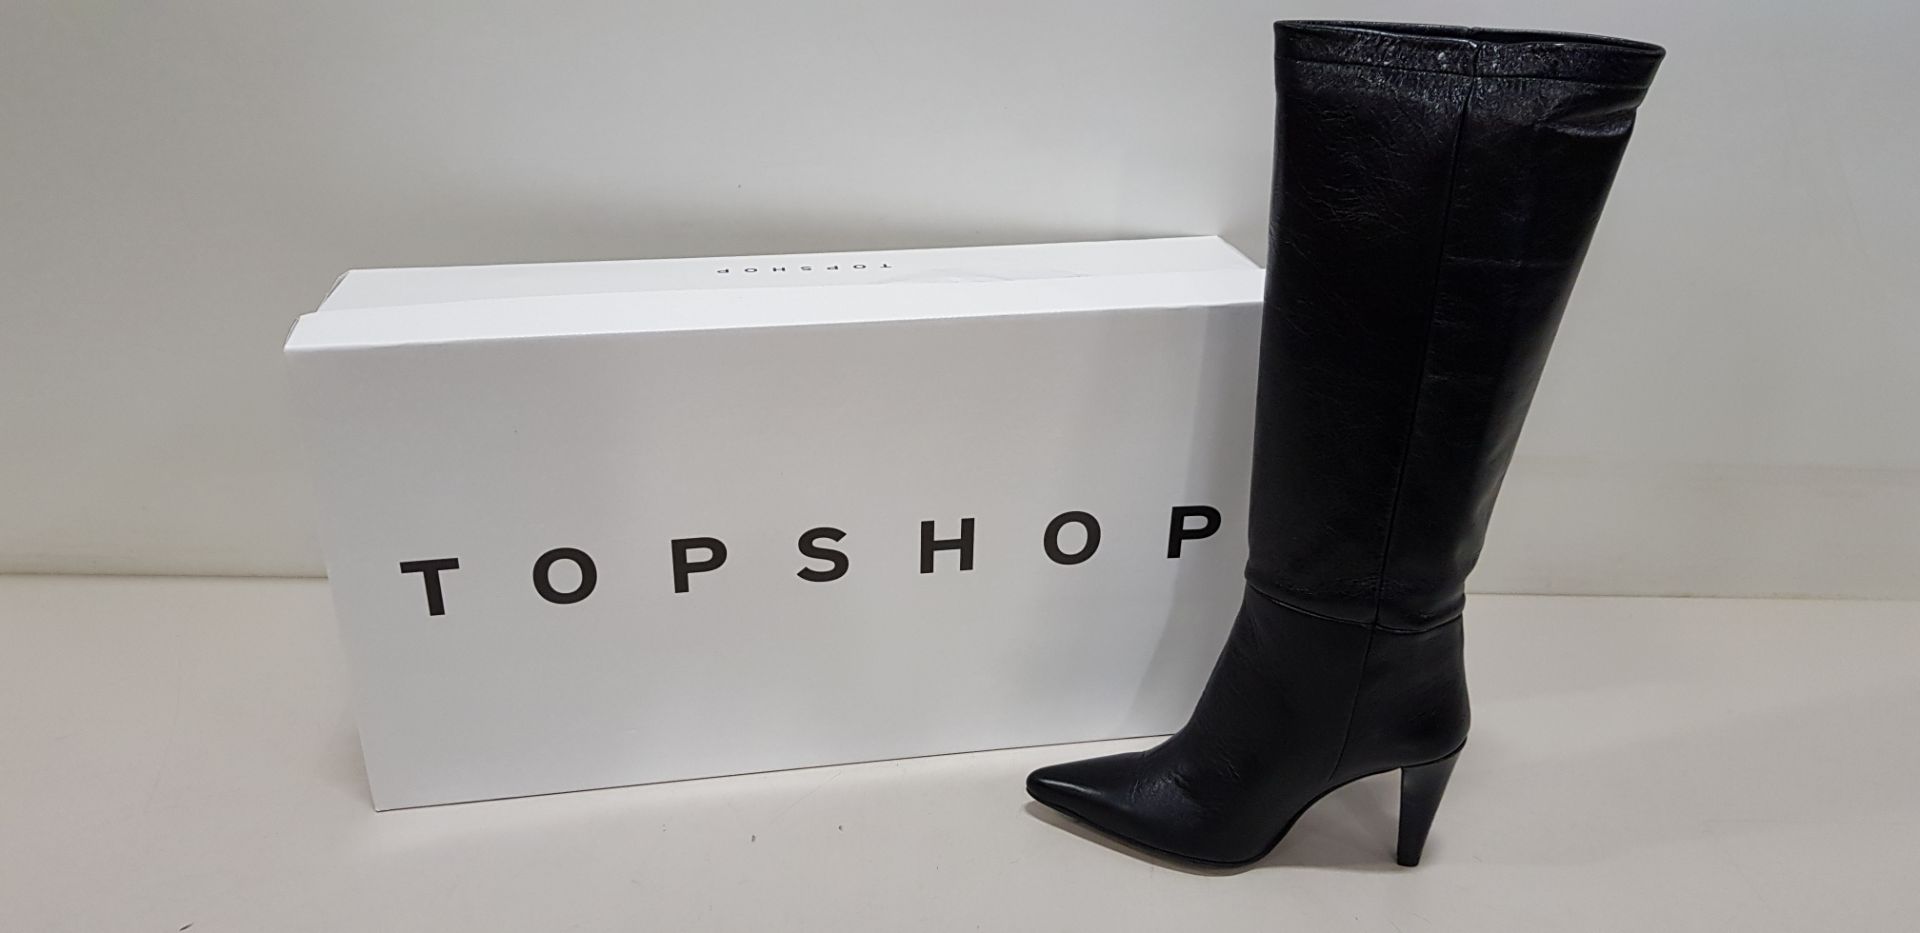 3 X BRAND NEW TOPSHOP TAYLOR BLACK KNEE HIGH HEELED BOOTS UK SIZE 5 RRP £120.00 (TOTAL RRP £360.00)